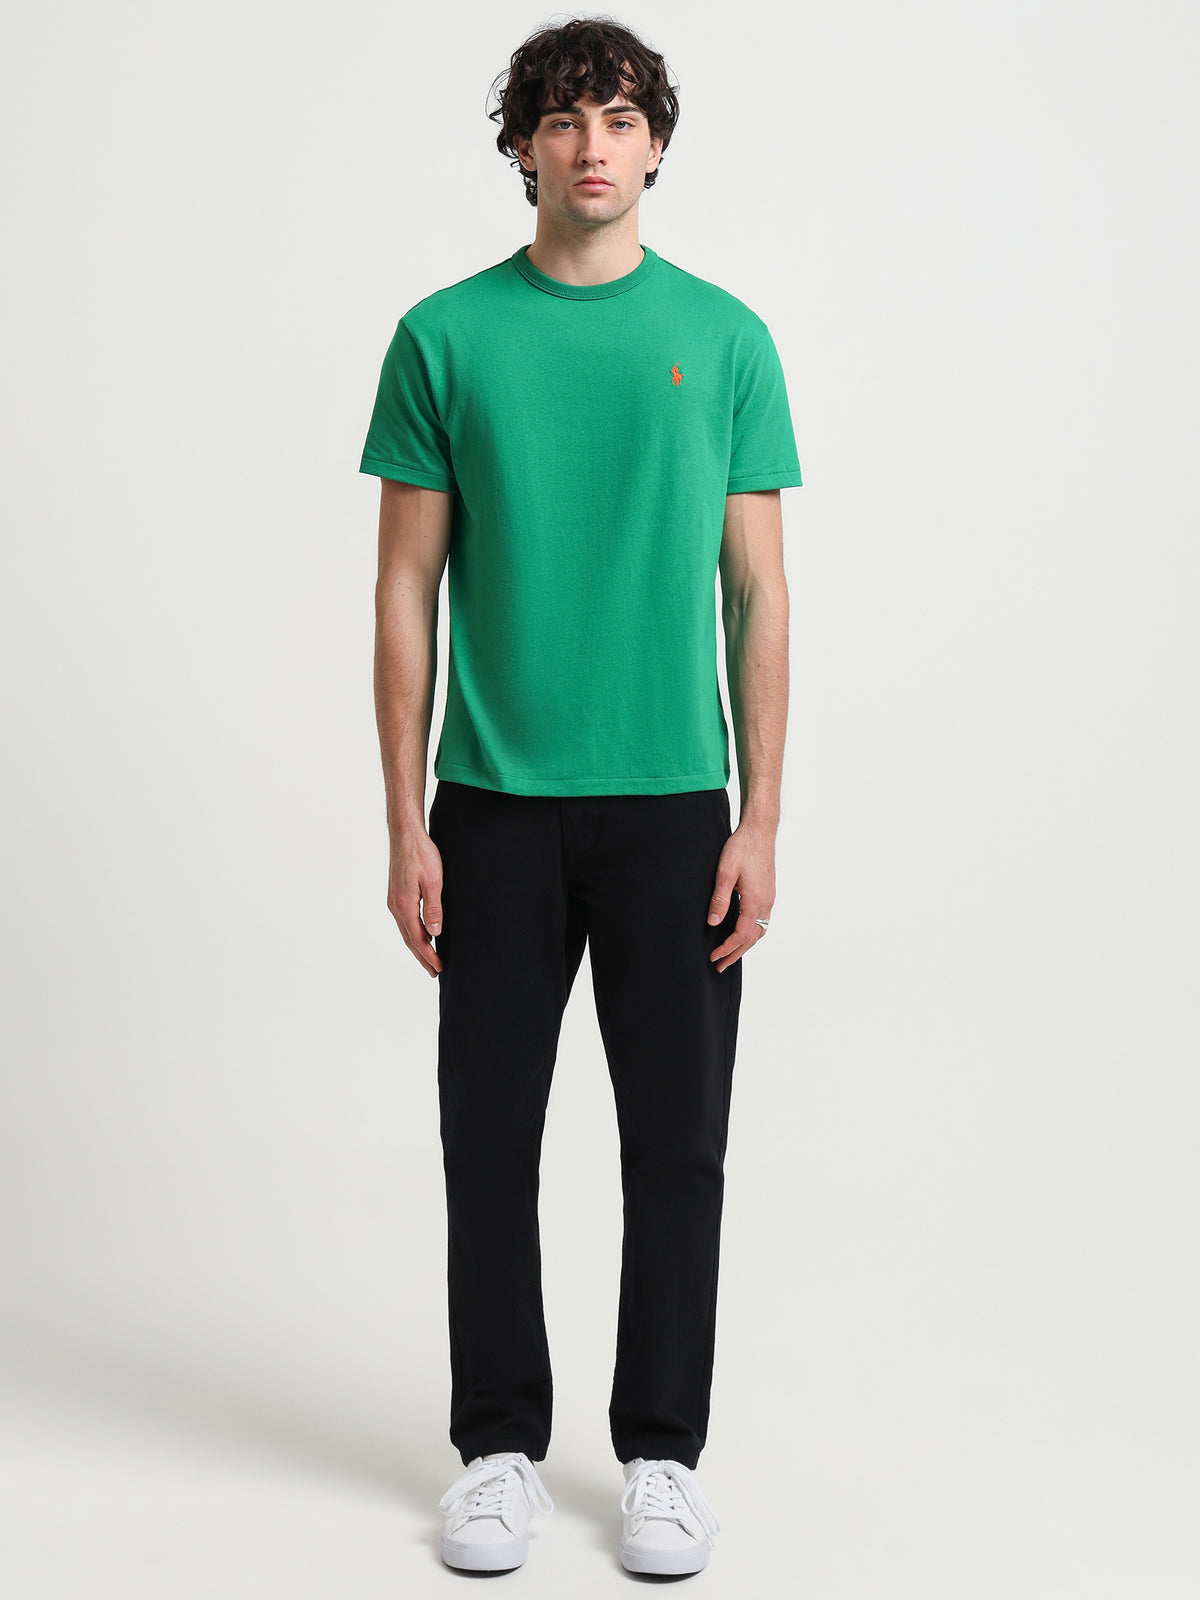 Classic Fit Jersey Crew Neck T-Shirt in Green